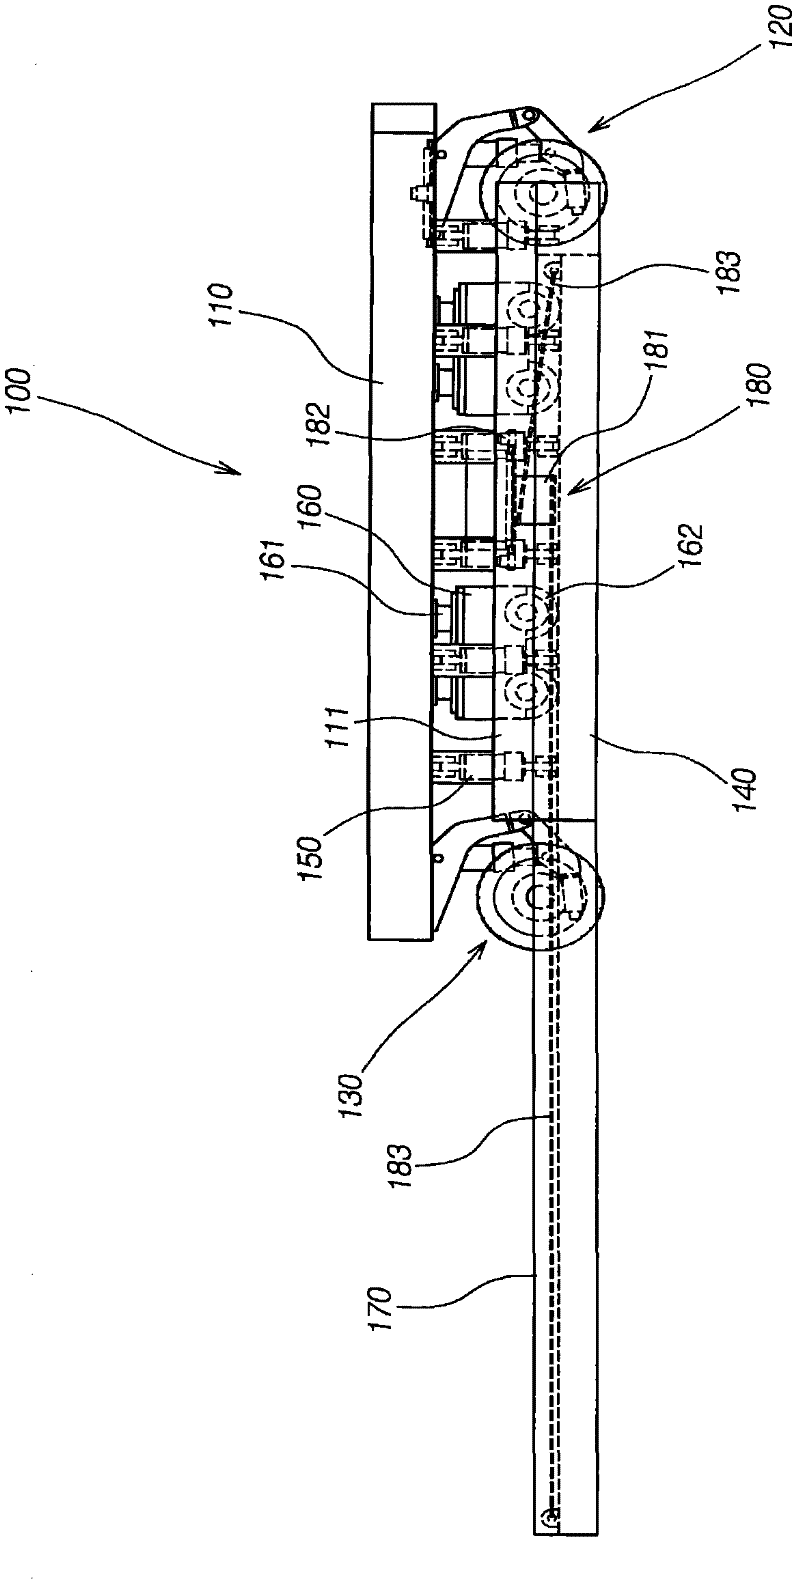 Movable rail apparatus for transferring ships and method of transferring ships using the same